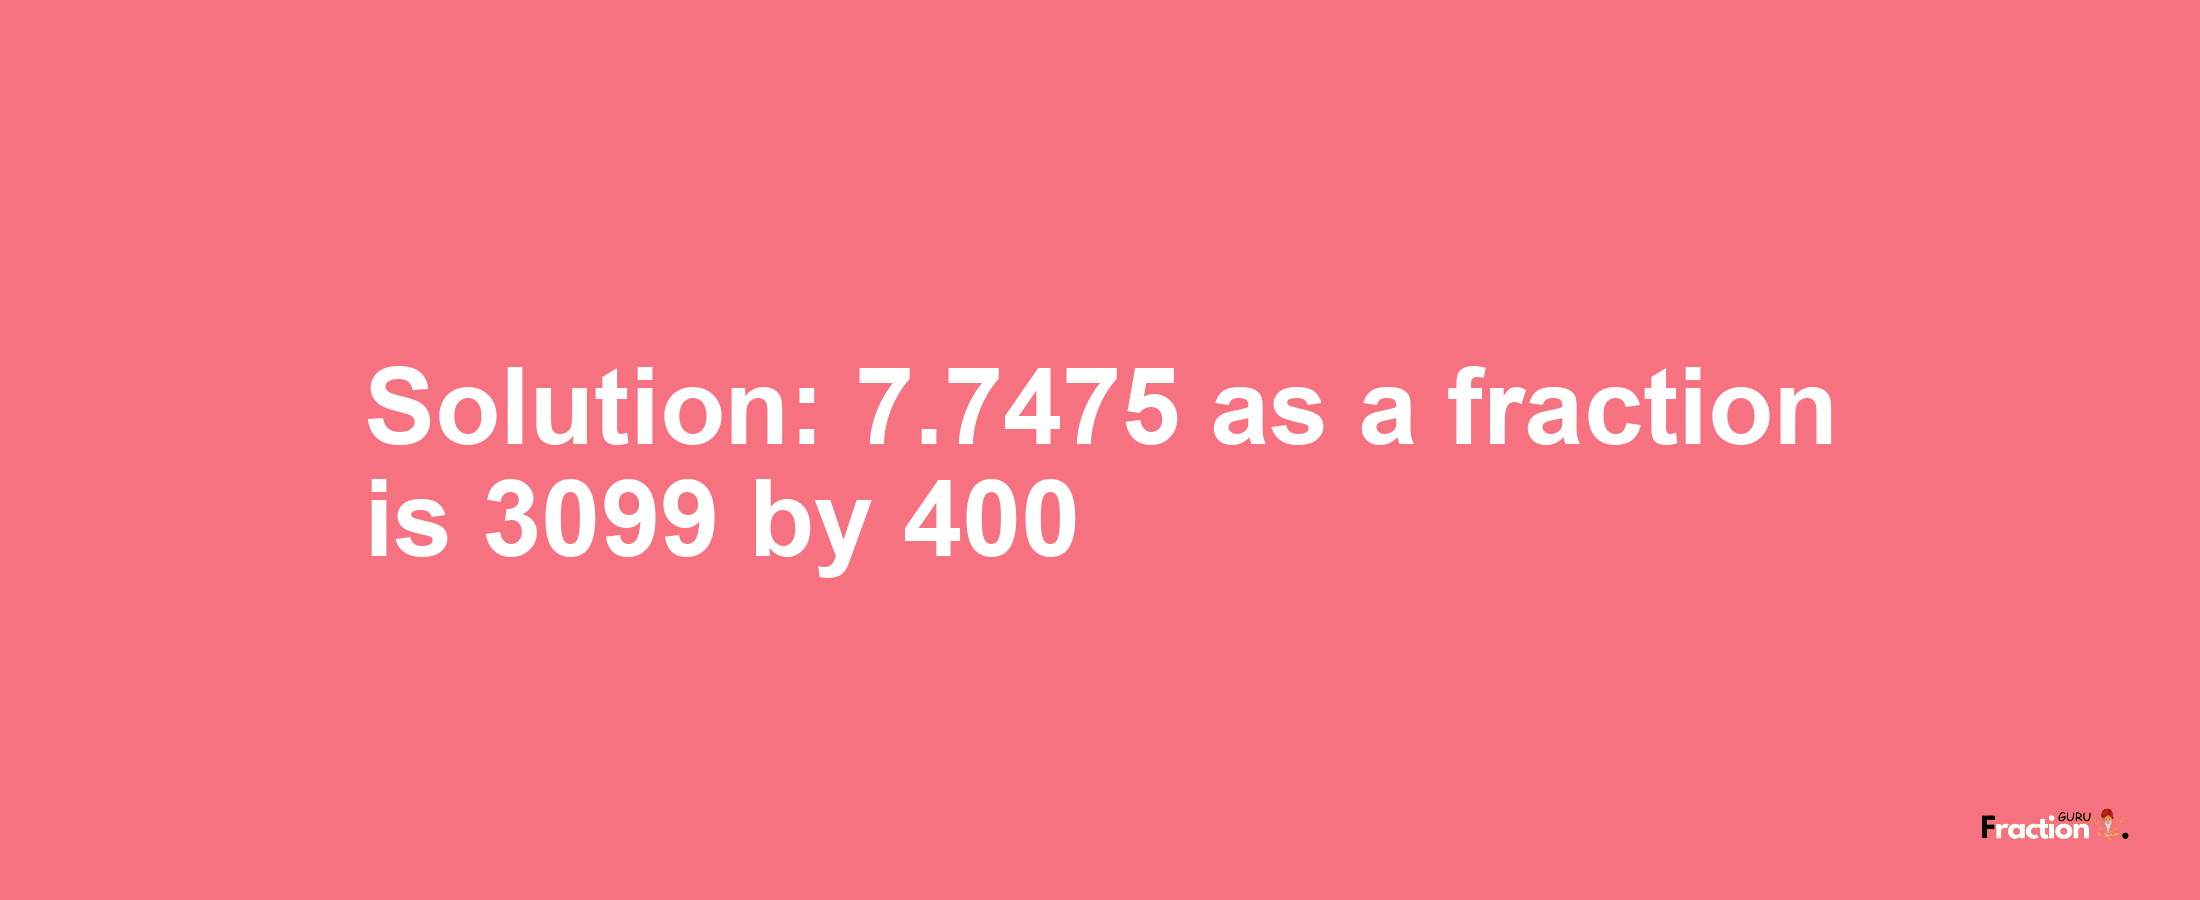 Solution:7.7475 as a fraction is 3099/400